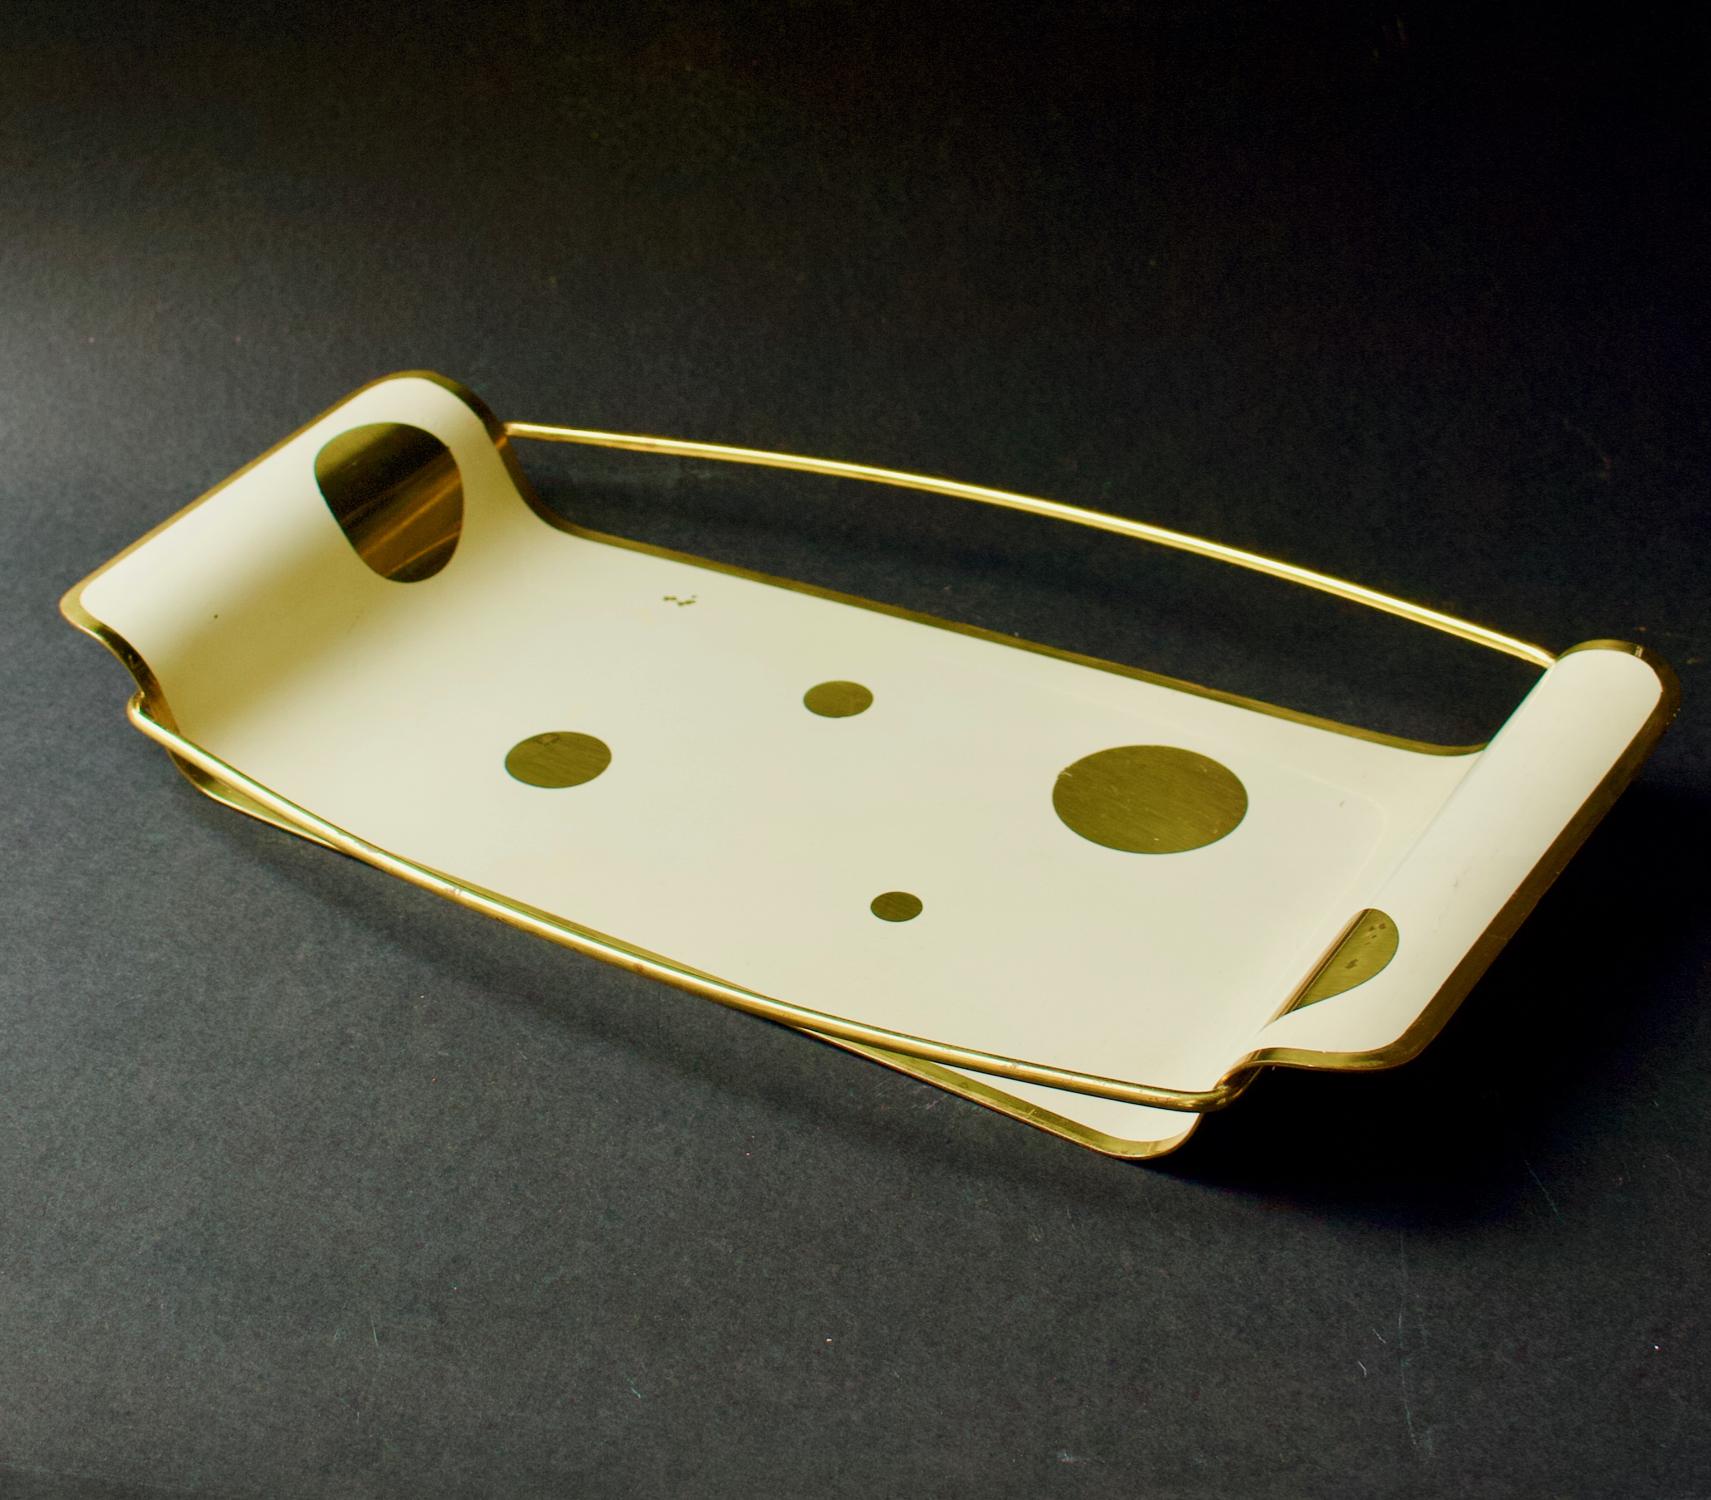 A small tray of painted brass, mid-20th century Germany.

The tray is of asymmetrical shape, with curved ends and long side rails. The top is painted in creamy off-white to reveal circles of brass and a brass edge. An attractive piece, possibly